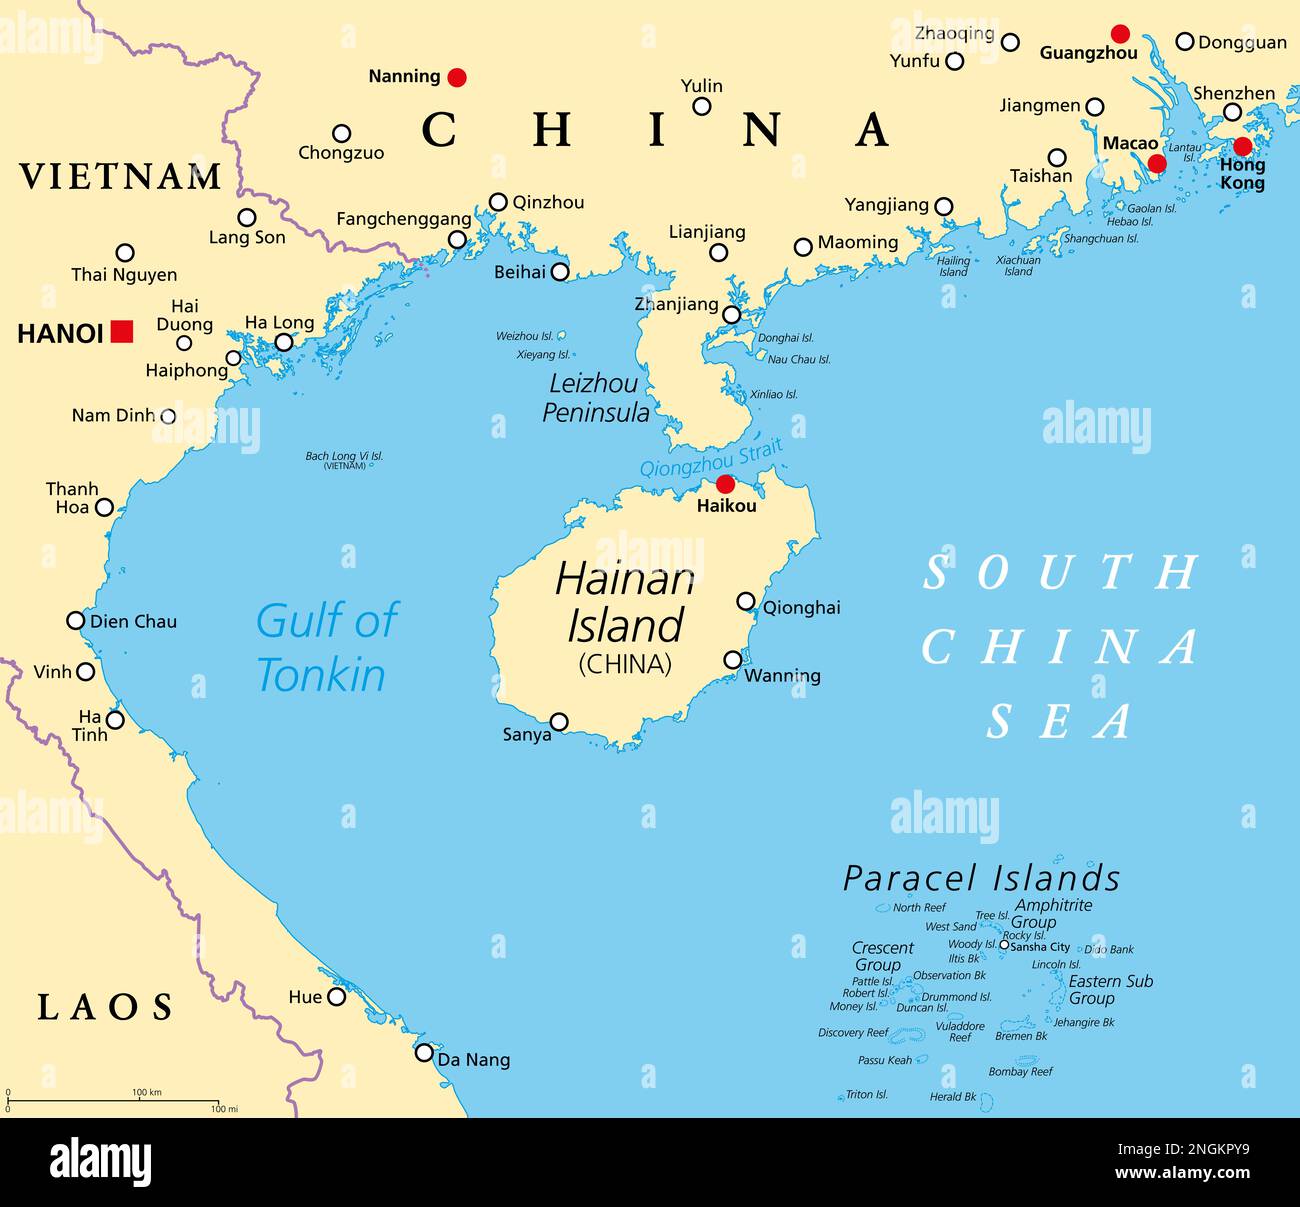 Hainan Southernmost Province Of China And Surrounding Area Political Map Hainan Island And The Paracel Islands In The South China Sea 2NGKPY9 